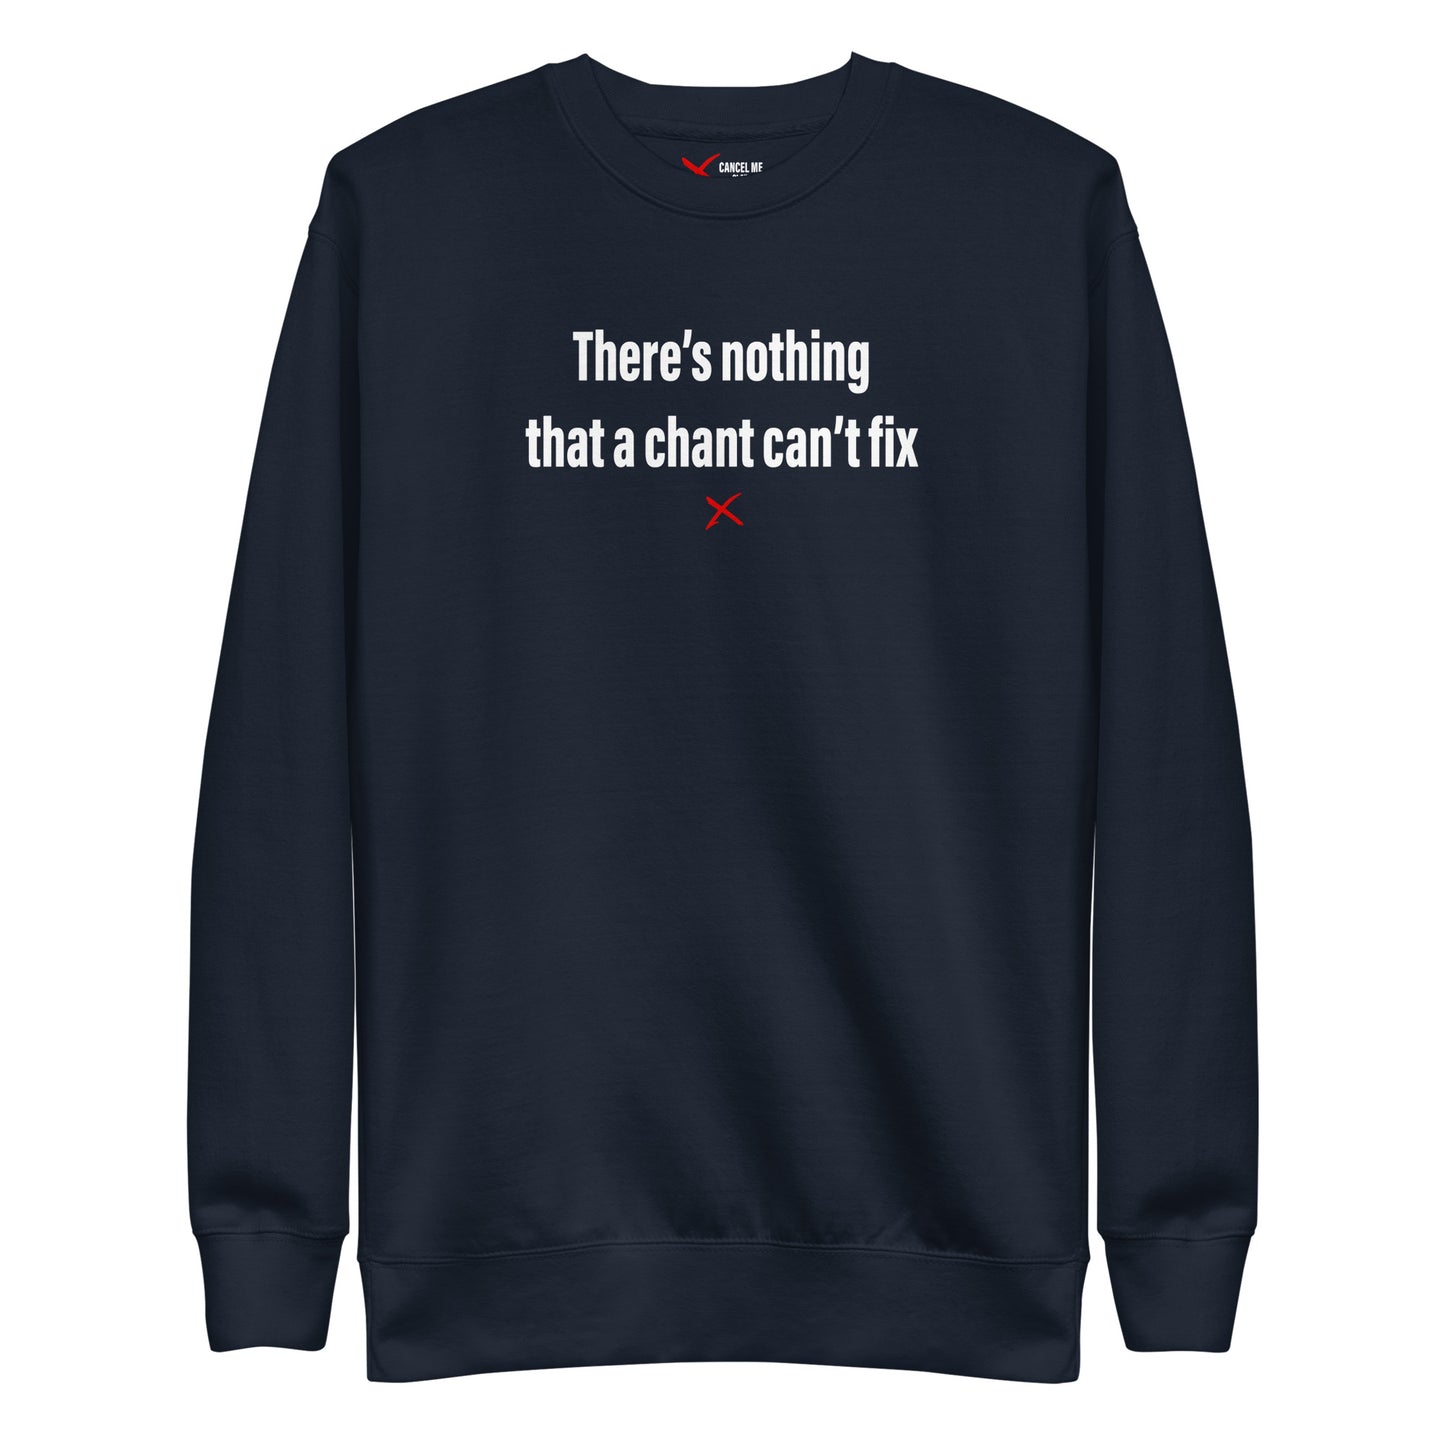 There's nothing that a chant can't fix - Sweatshirt